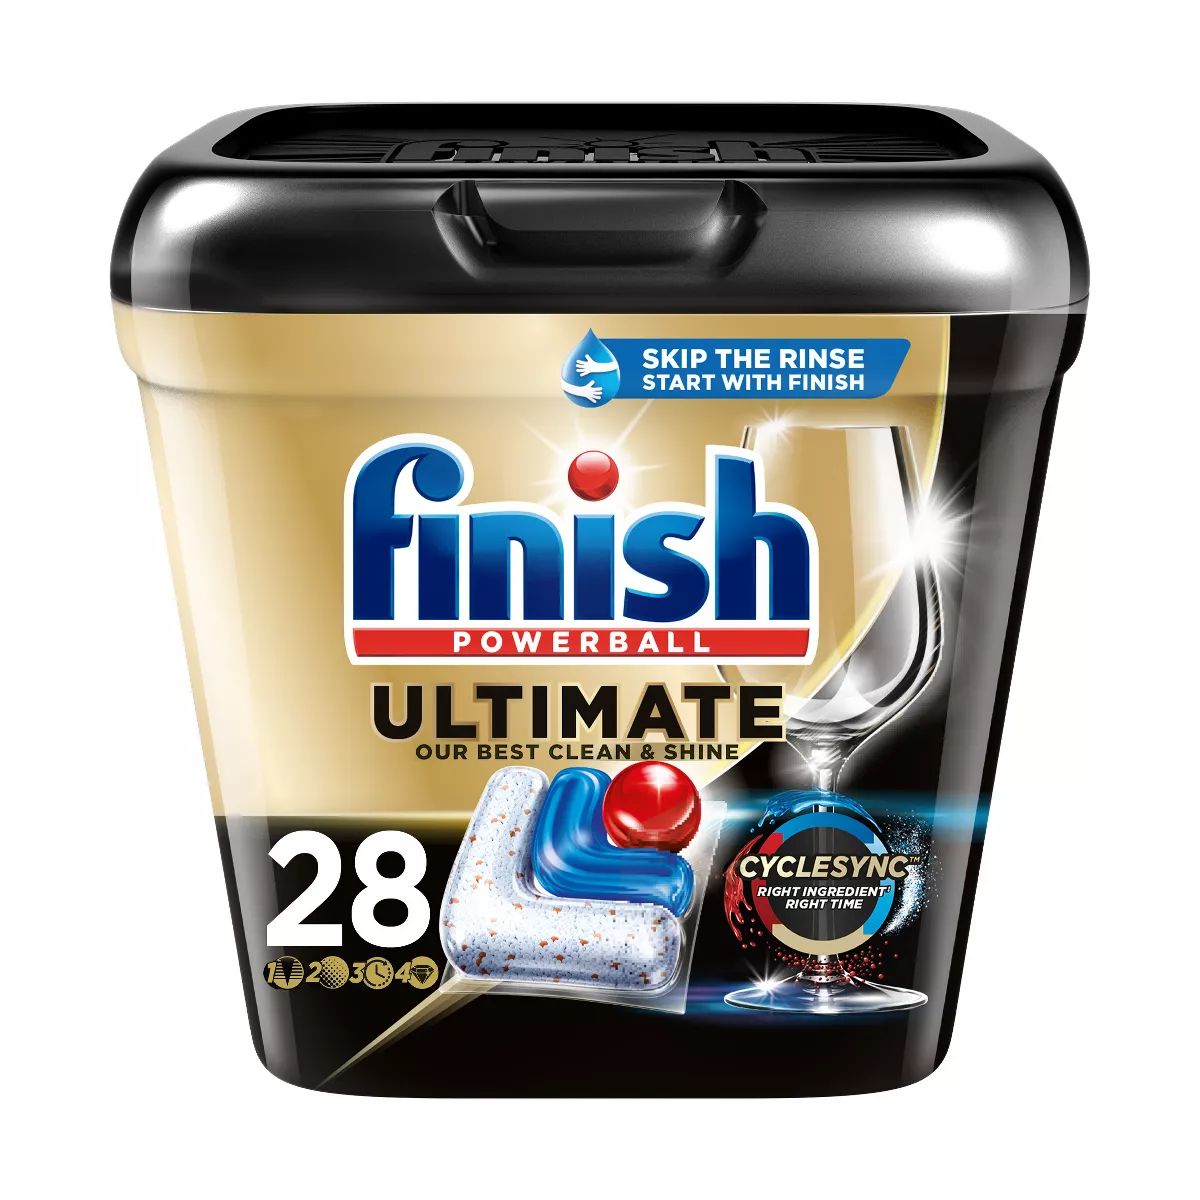 Finish Ultimate Dishwasher Detergent Tabs with CycleSync Technology - 38ct | Target